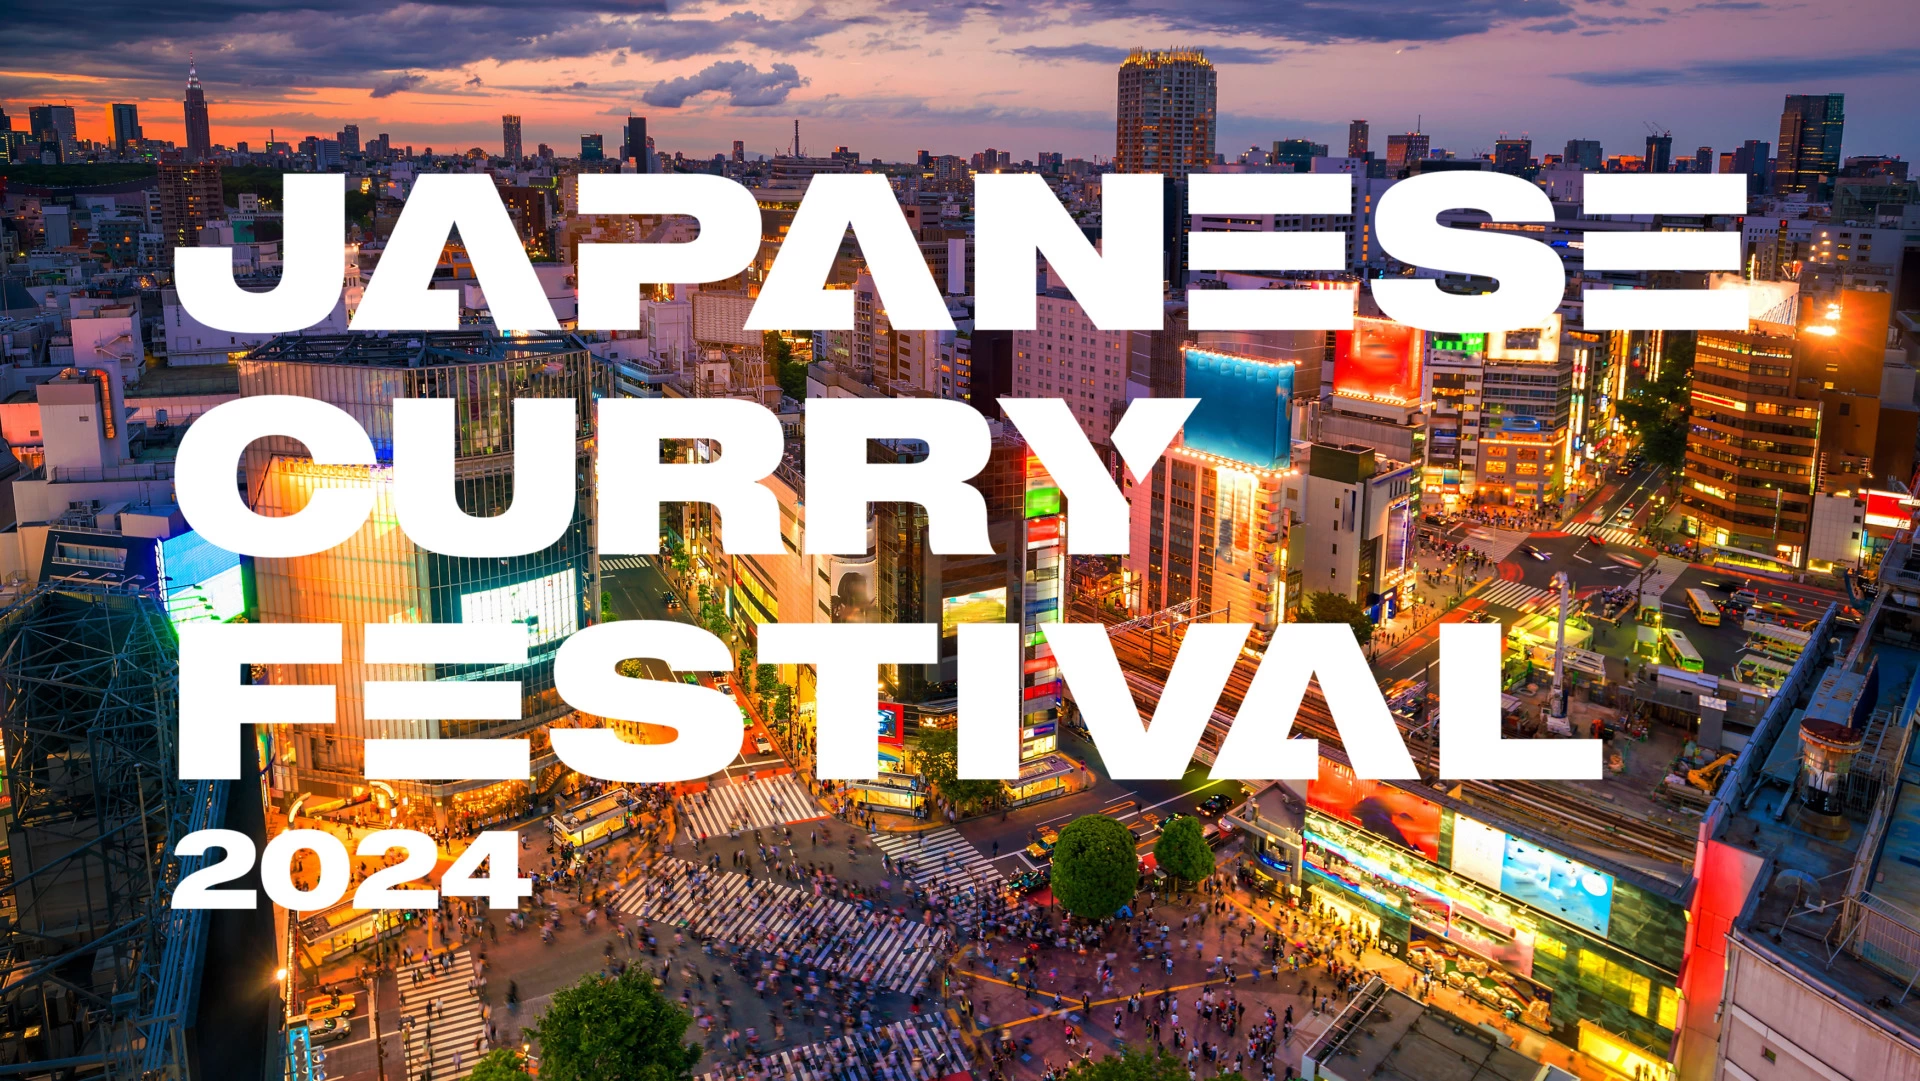 JAPANESE CURRY FESTIVAL 2024